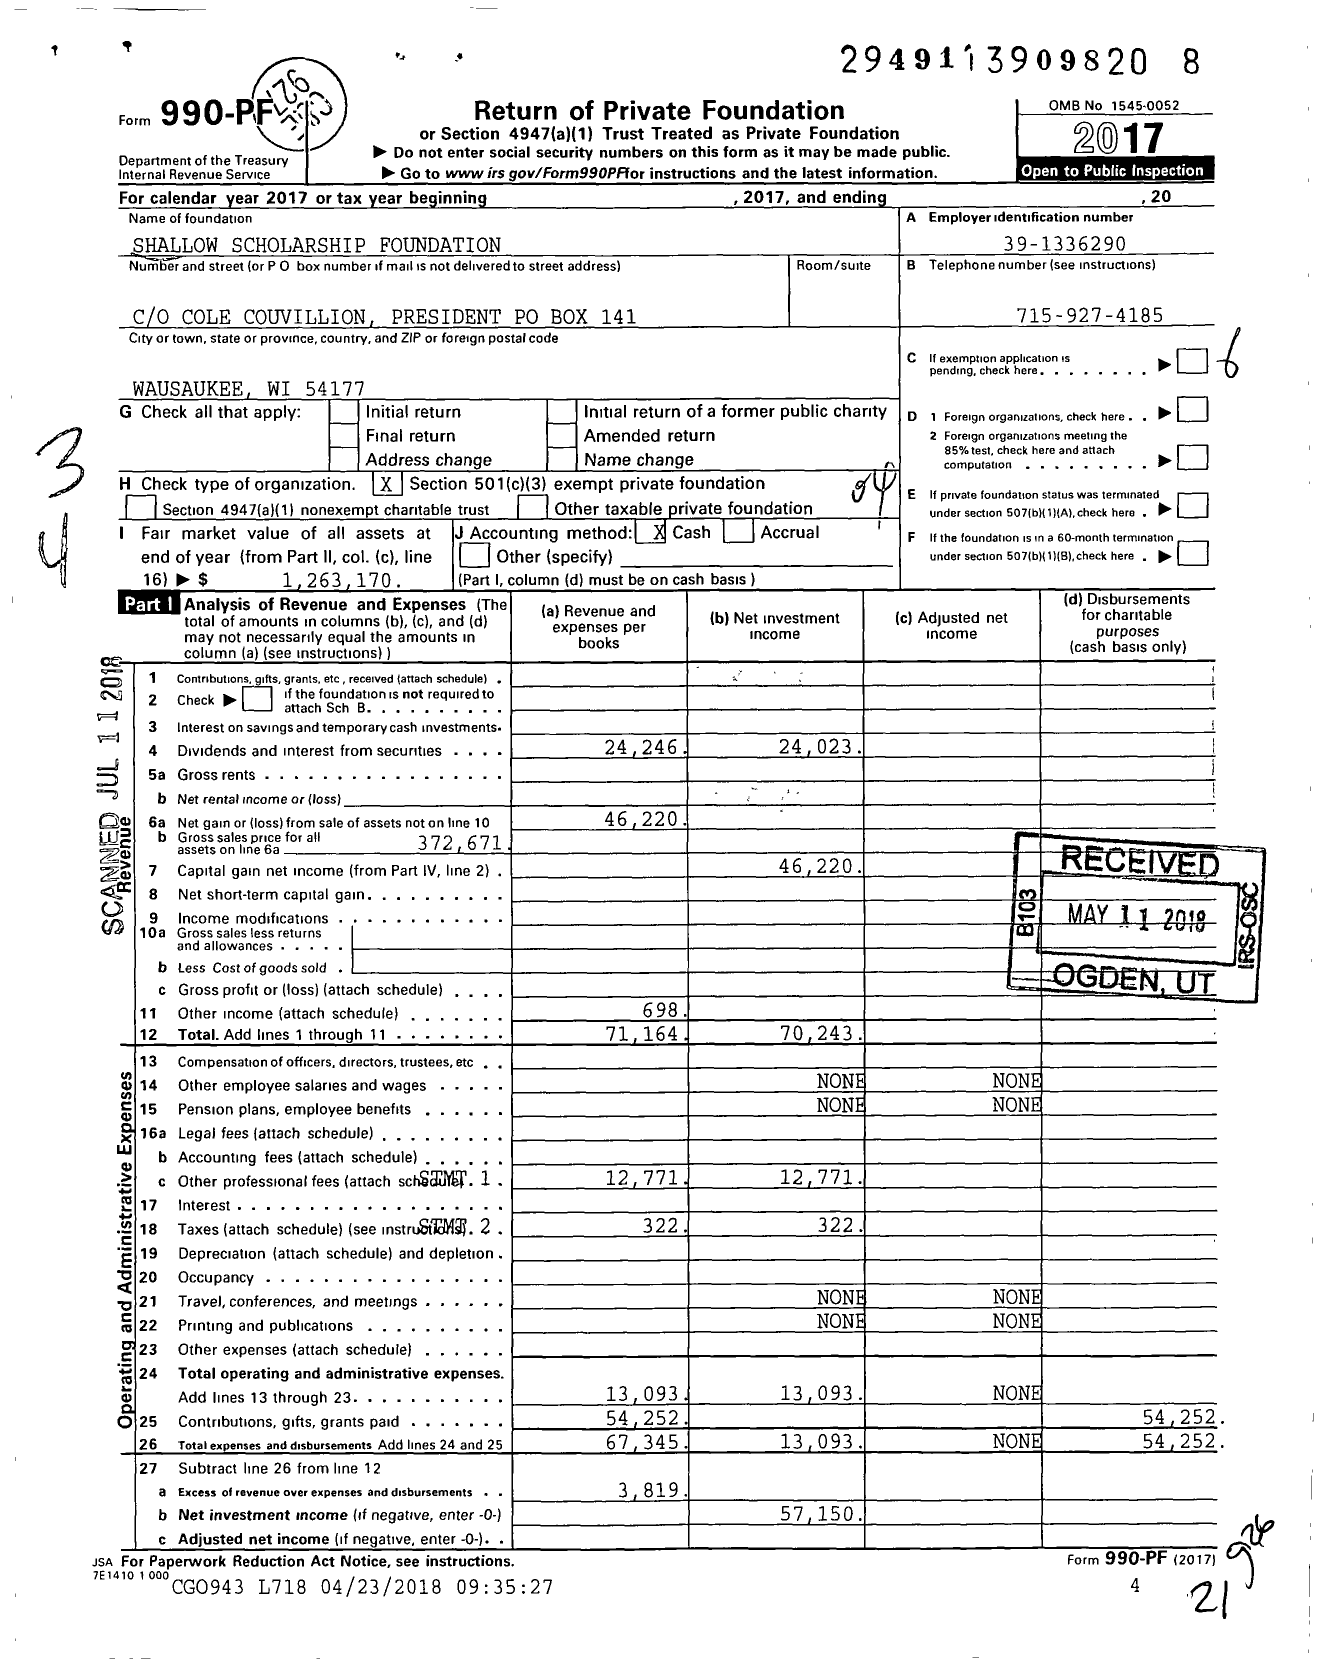 Image of first page of 2017 Form 990PF for Shallow Scholarship Foundation Agency